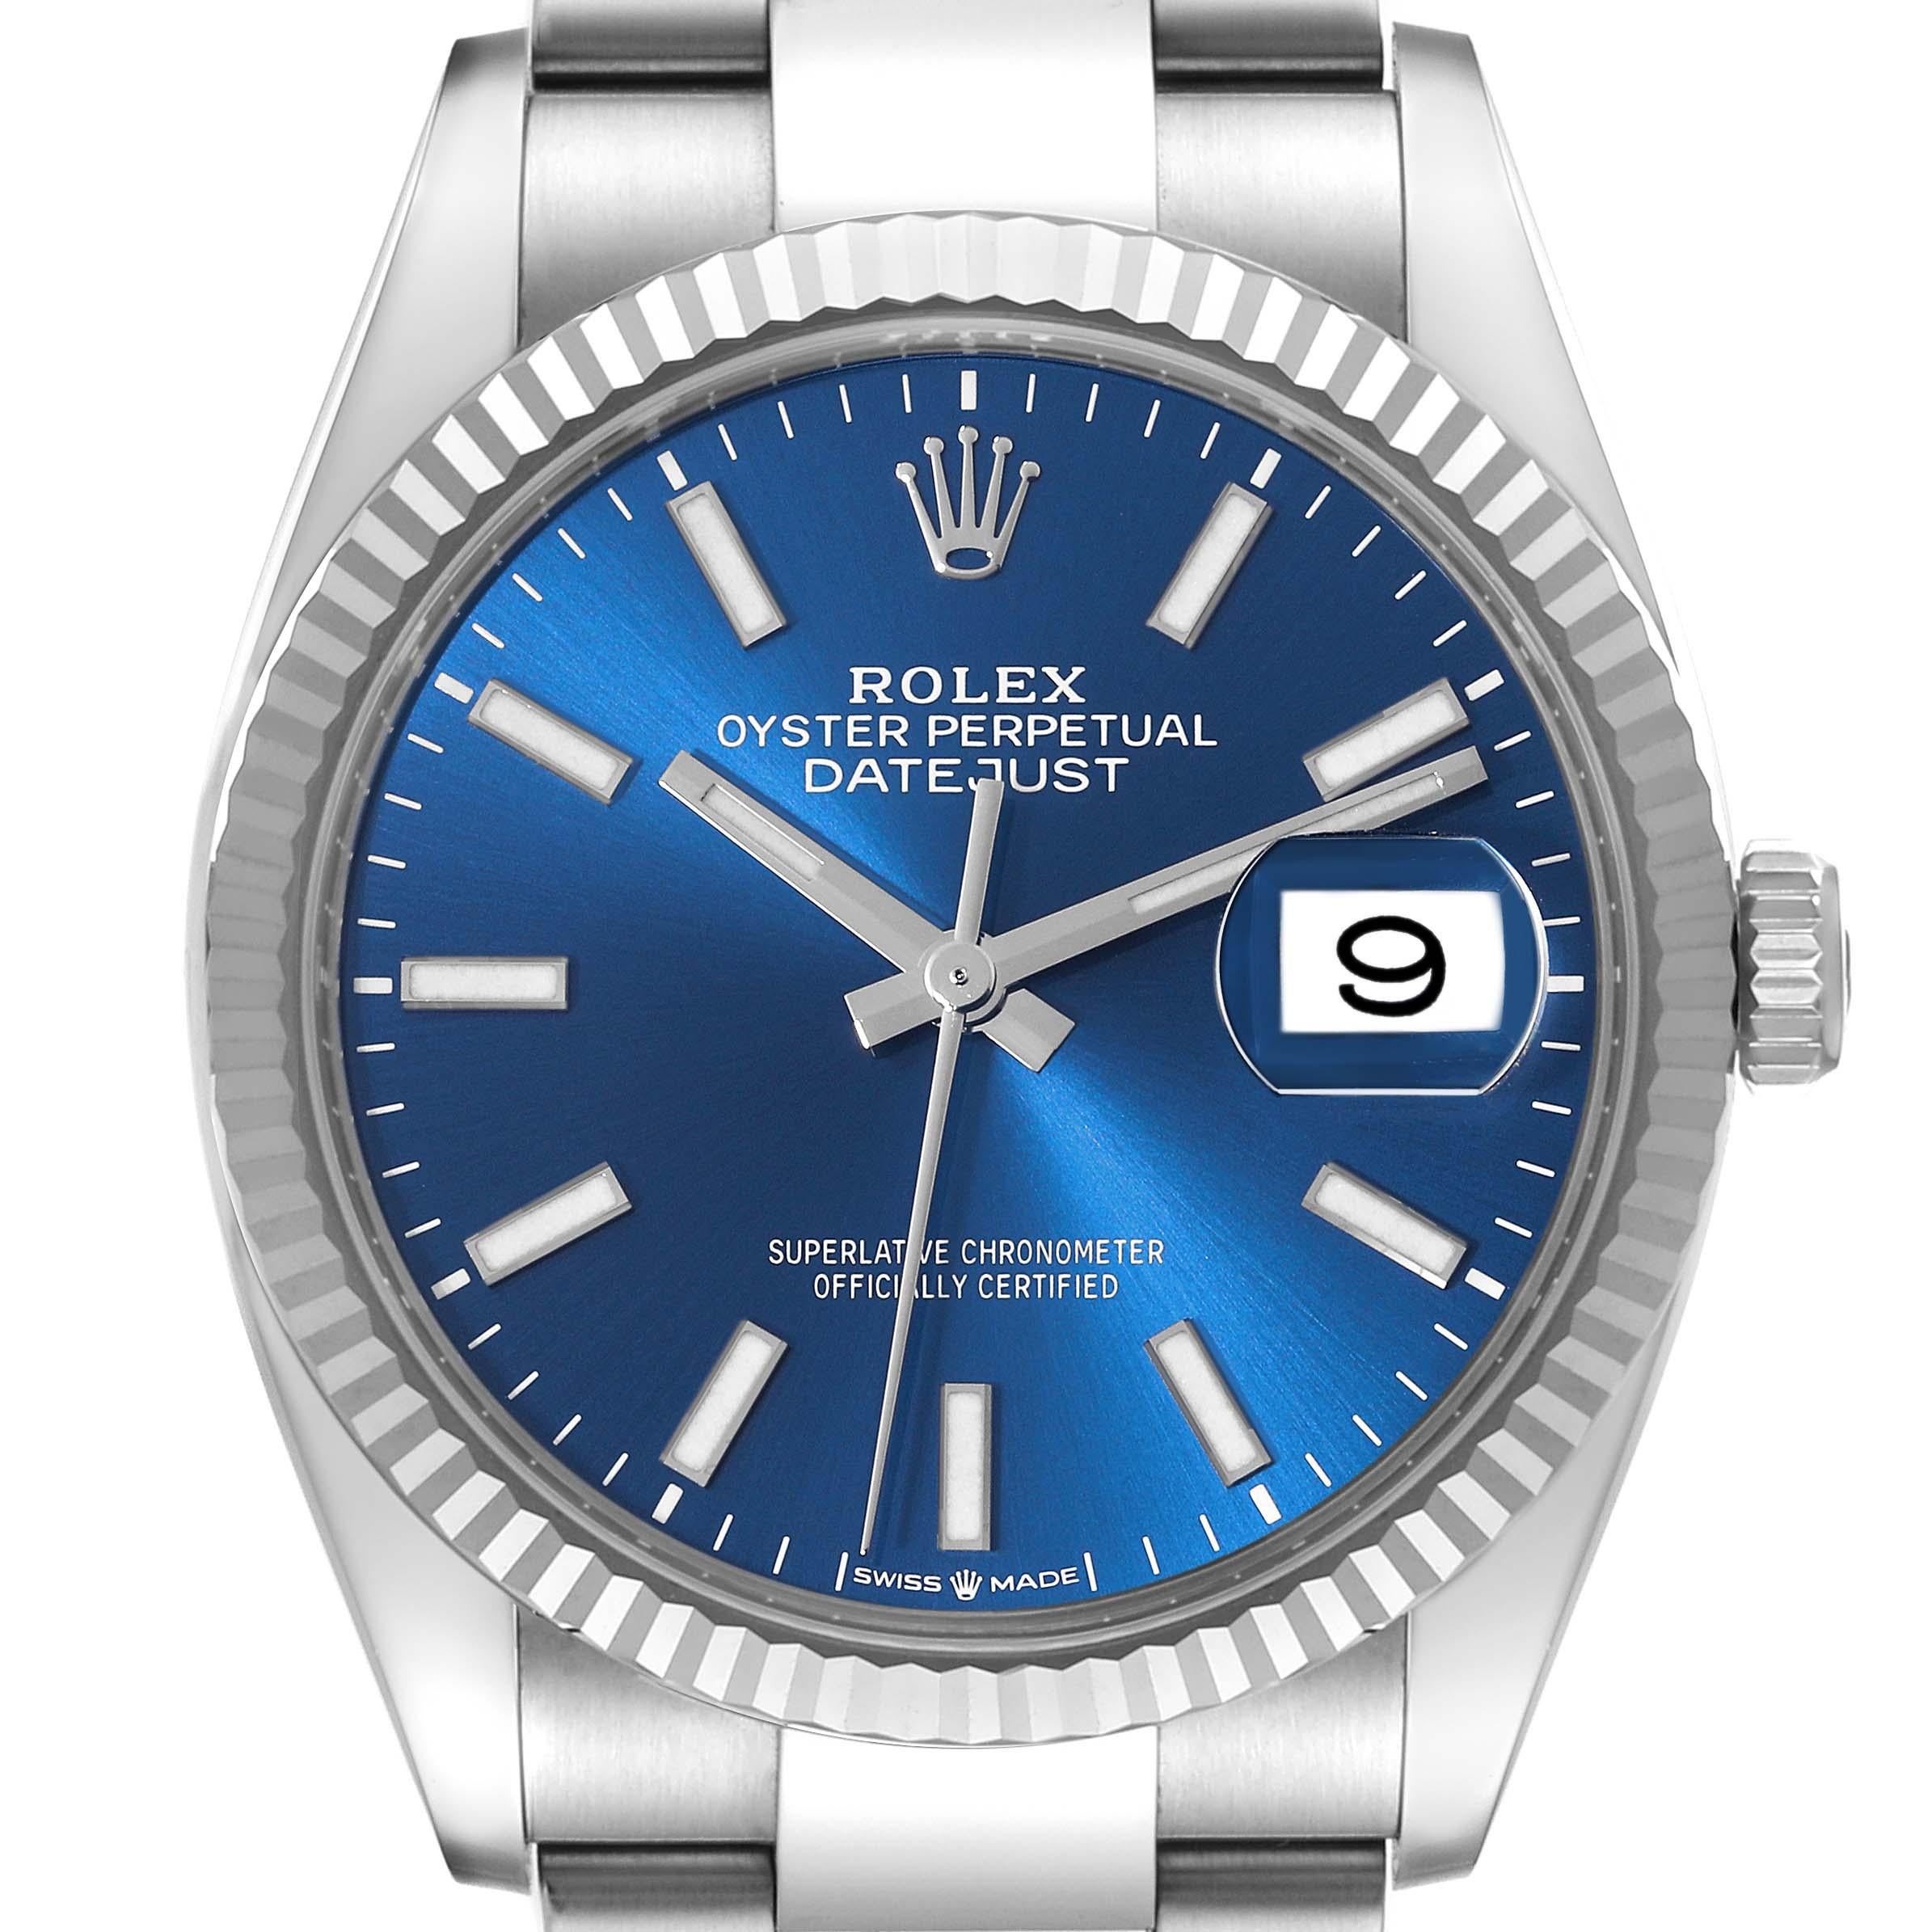 Rolex Datejust Steel White Gold Blue Dial Mens Watch 126234 Box Card. Officially certified chronometer self-winding movement. Stainless steel case 36.0 mm in diameter.  Rolex logo on a crown. 18K white gold fluted bezel. Scratch resistant sapphire